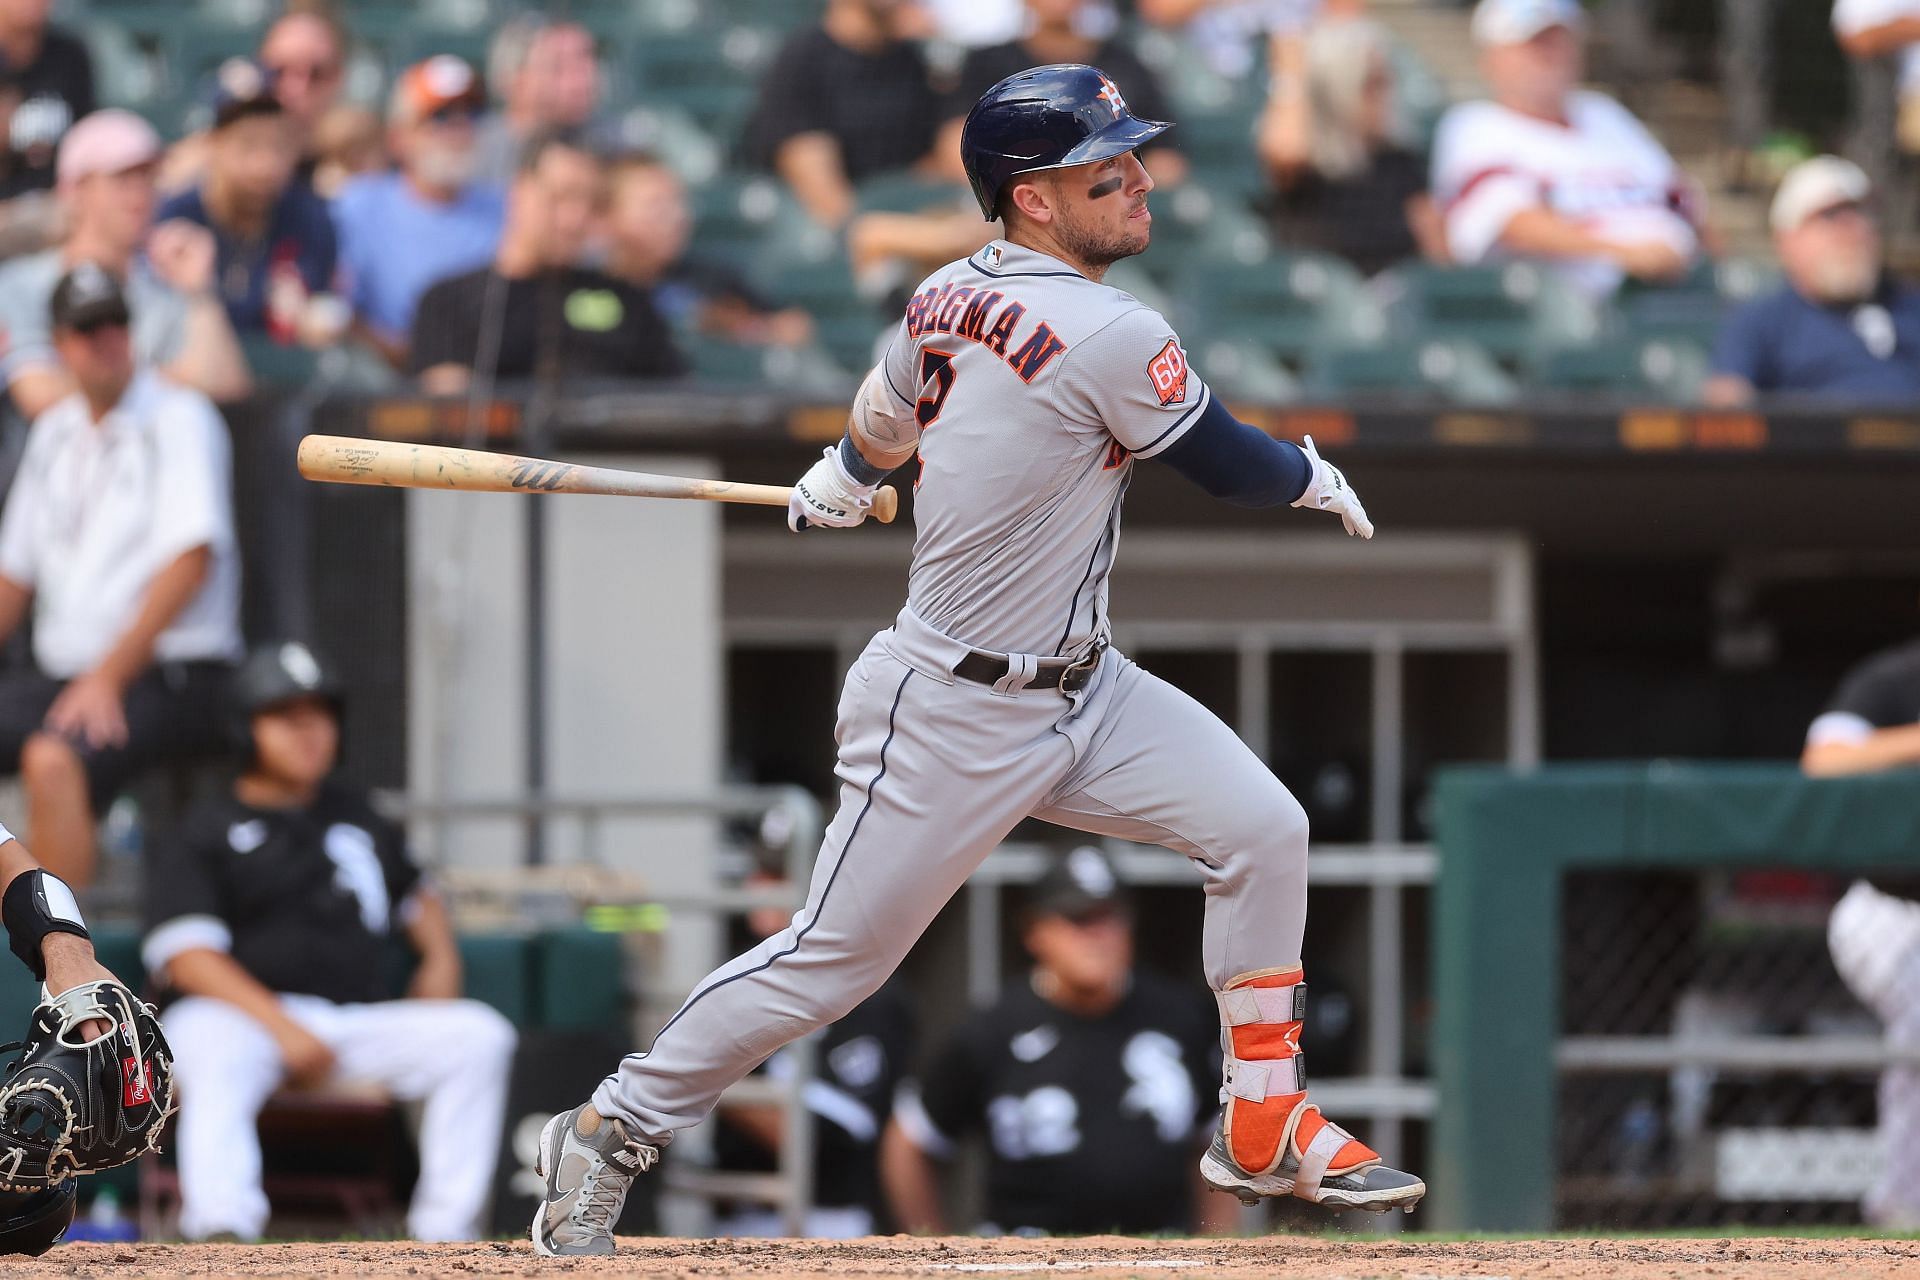 Why the Astros' LINEUP might be BETTER than their 2019 LINEUP